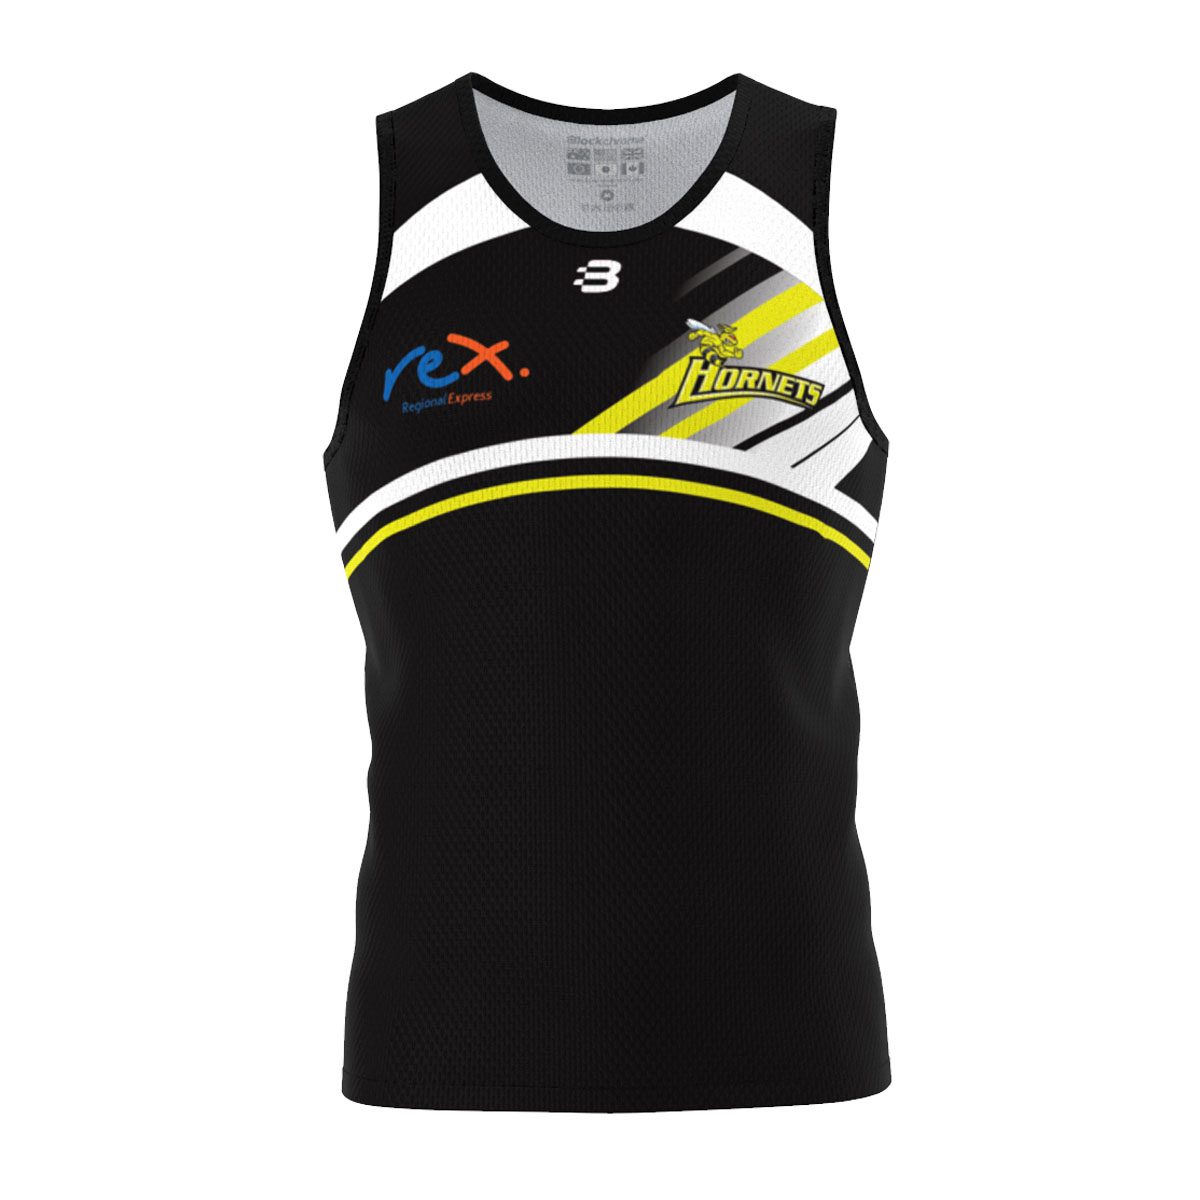 Cheap and Best Custom-made Softball Uniforms in Perth, Western